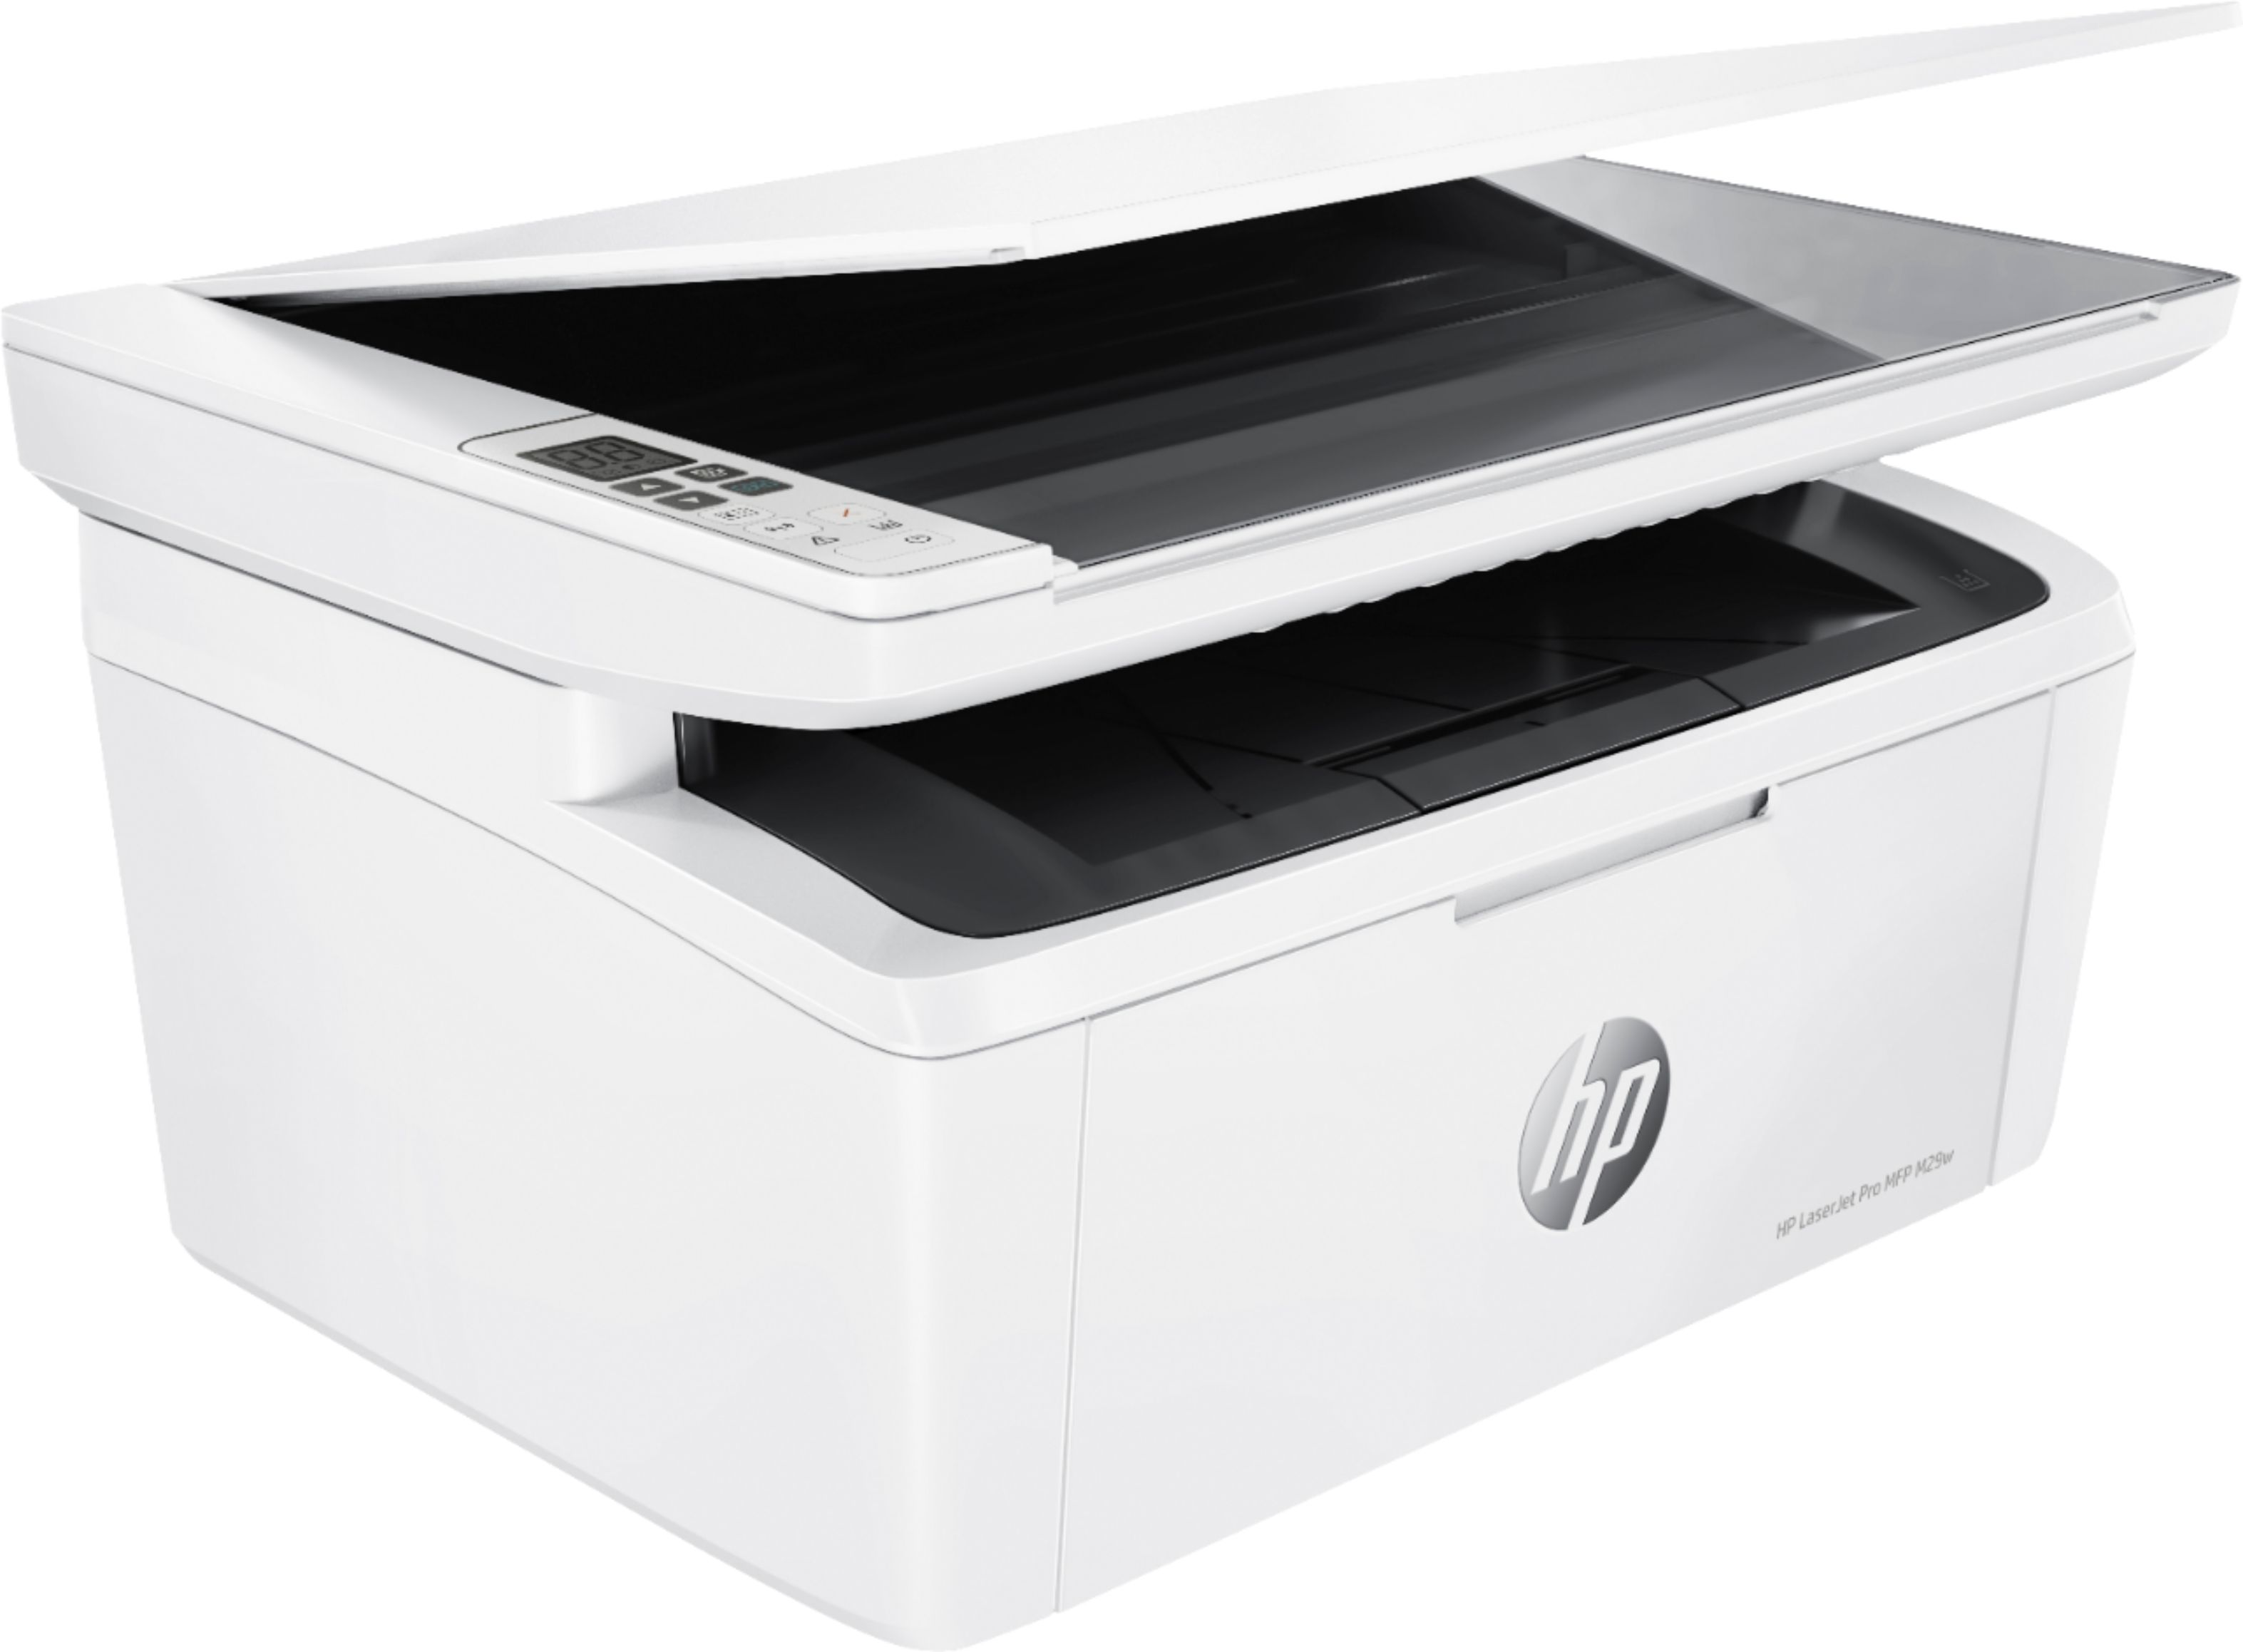 Angle View: HP - LaserJet Pro MFP M29W Wireless Black-and-White All-In-One Laser Printer - White